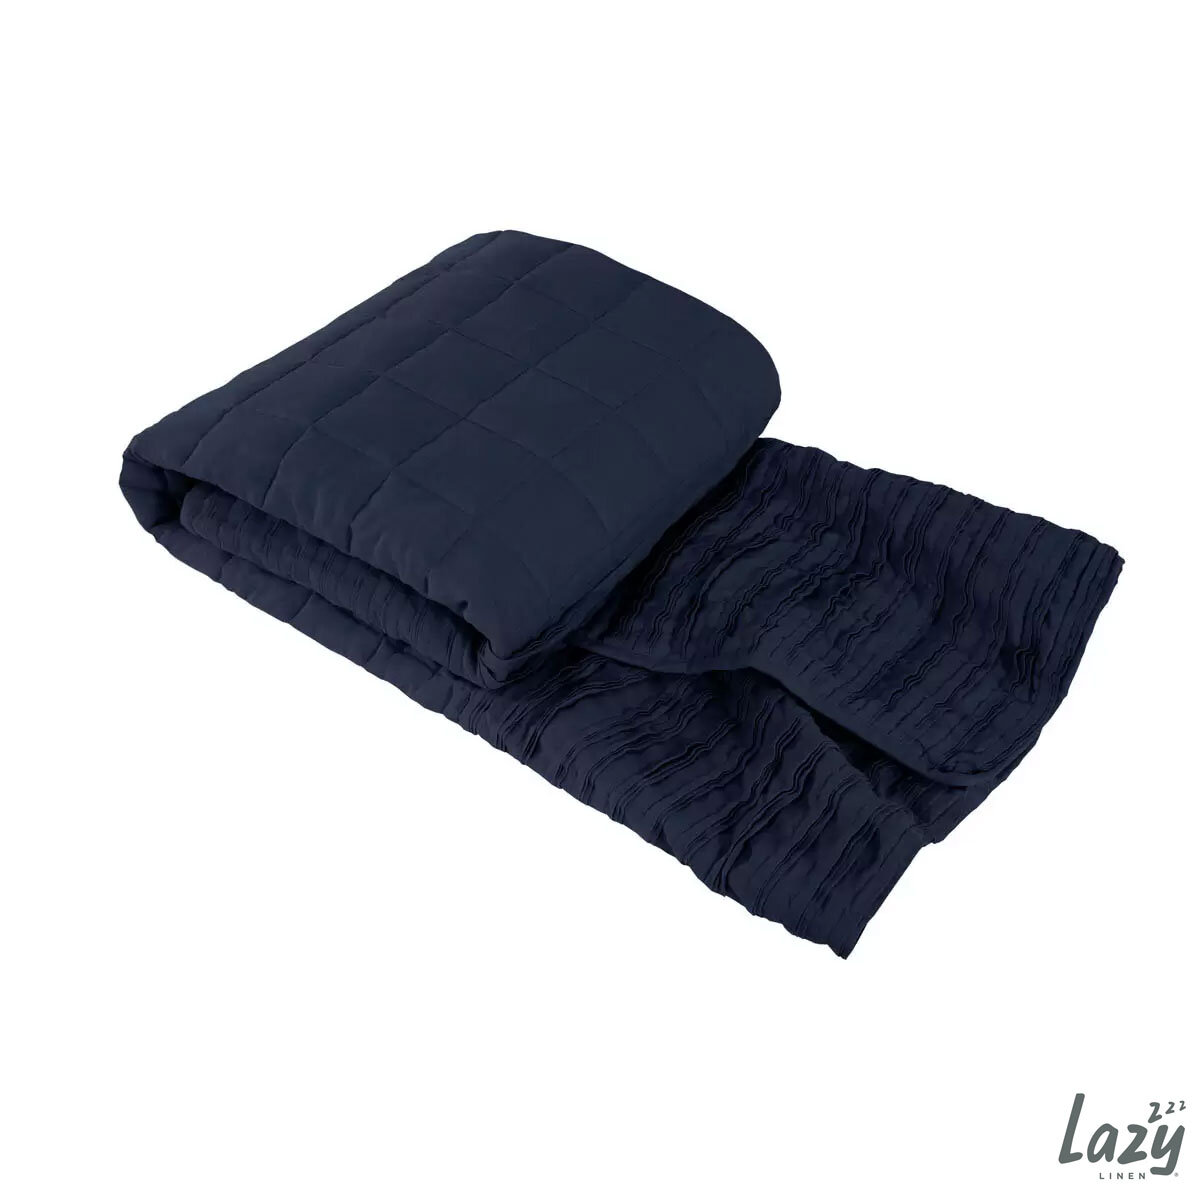 Lazy Linen 100% Washed Linen Throw in Navy